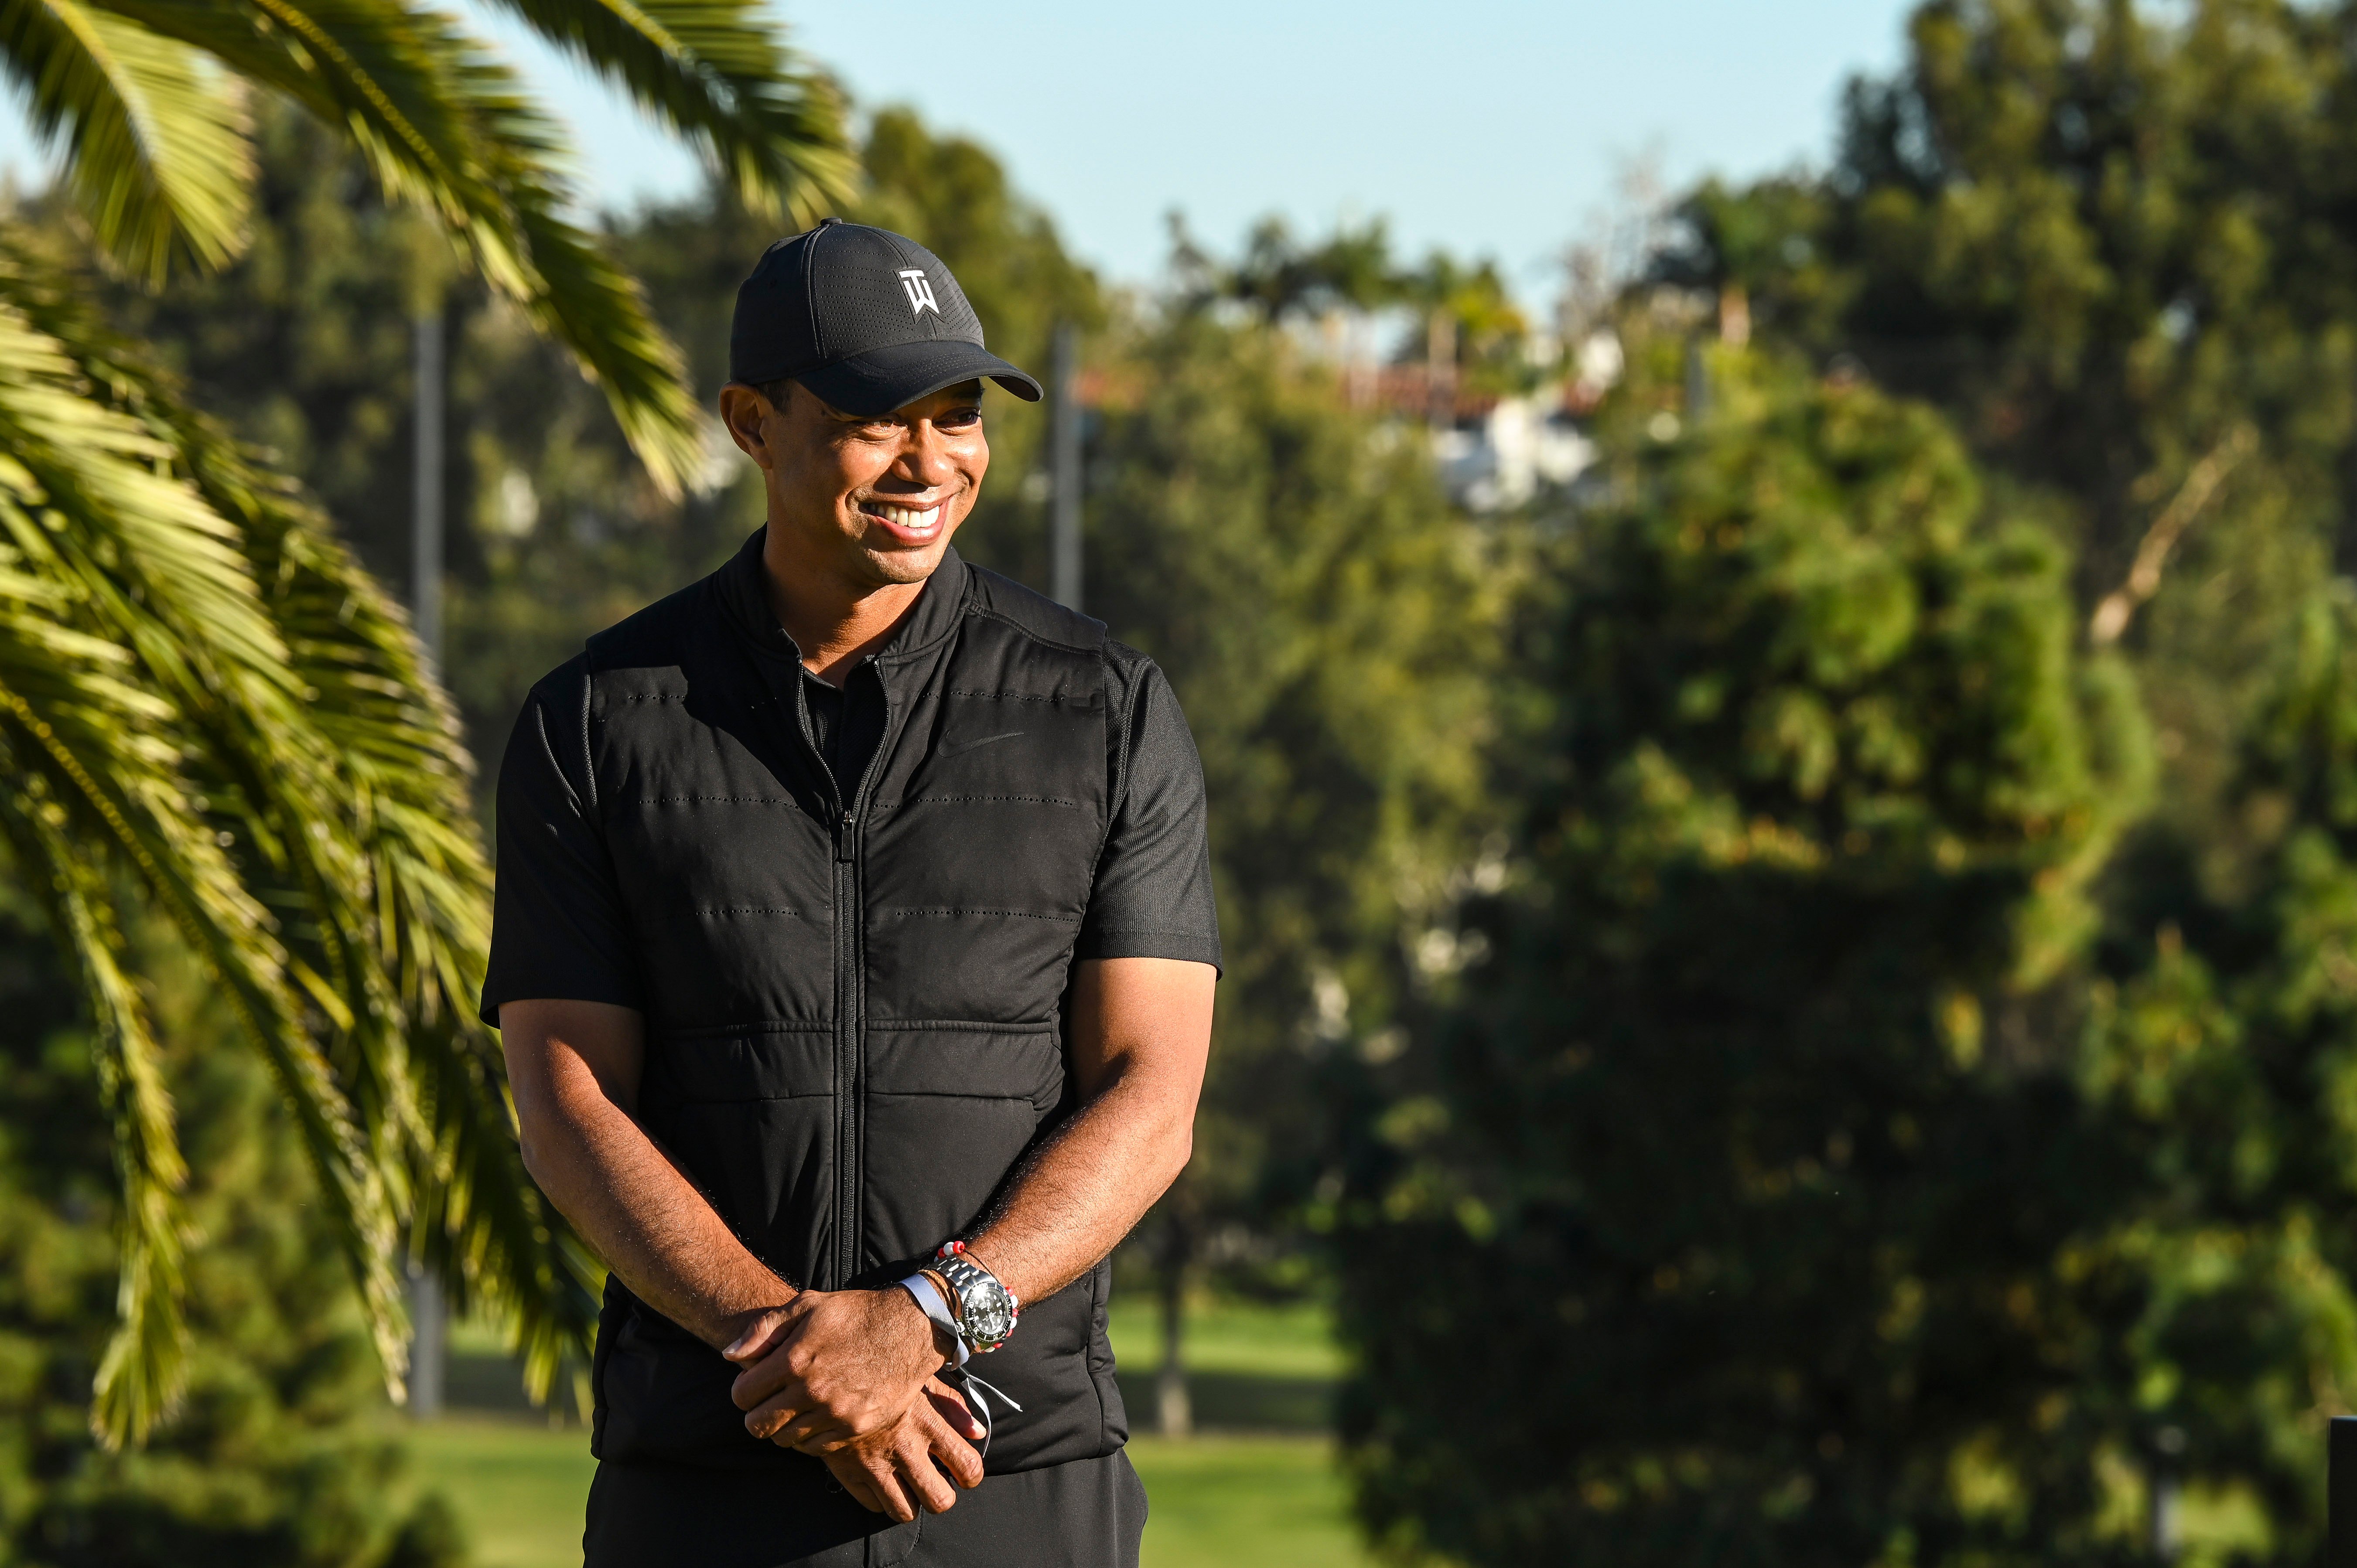 Tiger Woods smiles during the final round of The Genesis Invitational